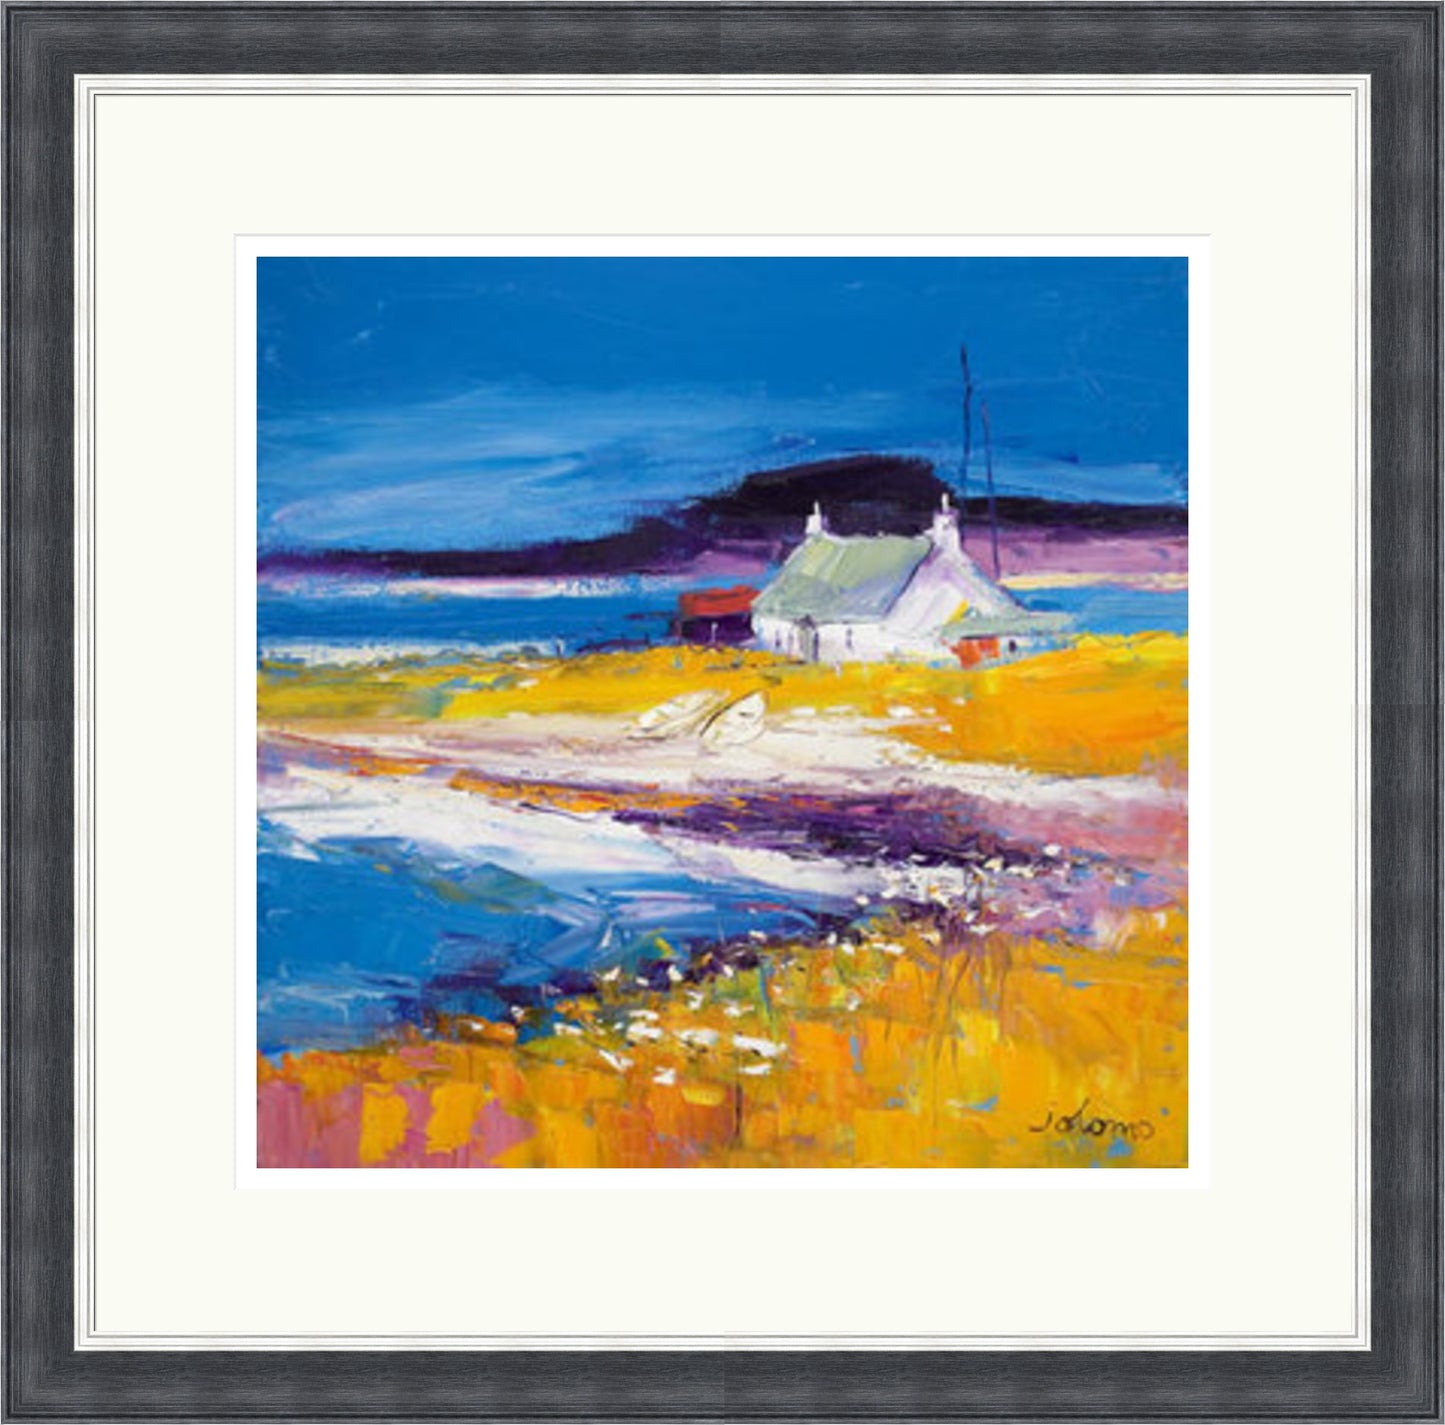 Beached Boats, Isle of Harris Signed Limited Edition by John Lowrie Morrison (JOLOMO)